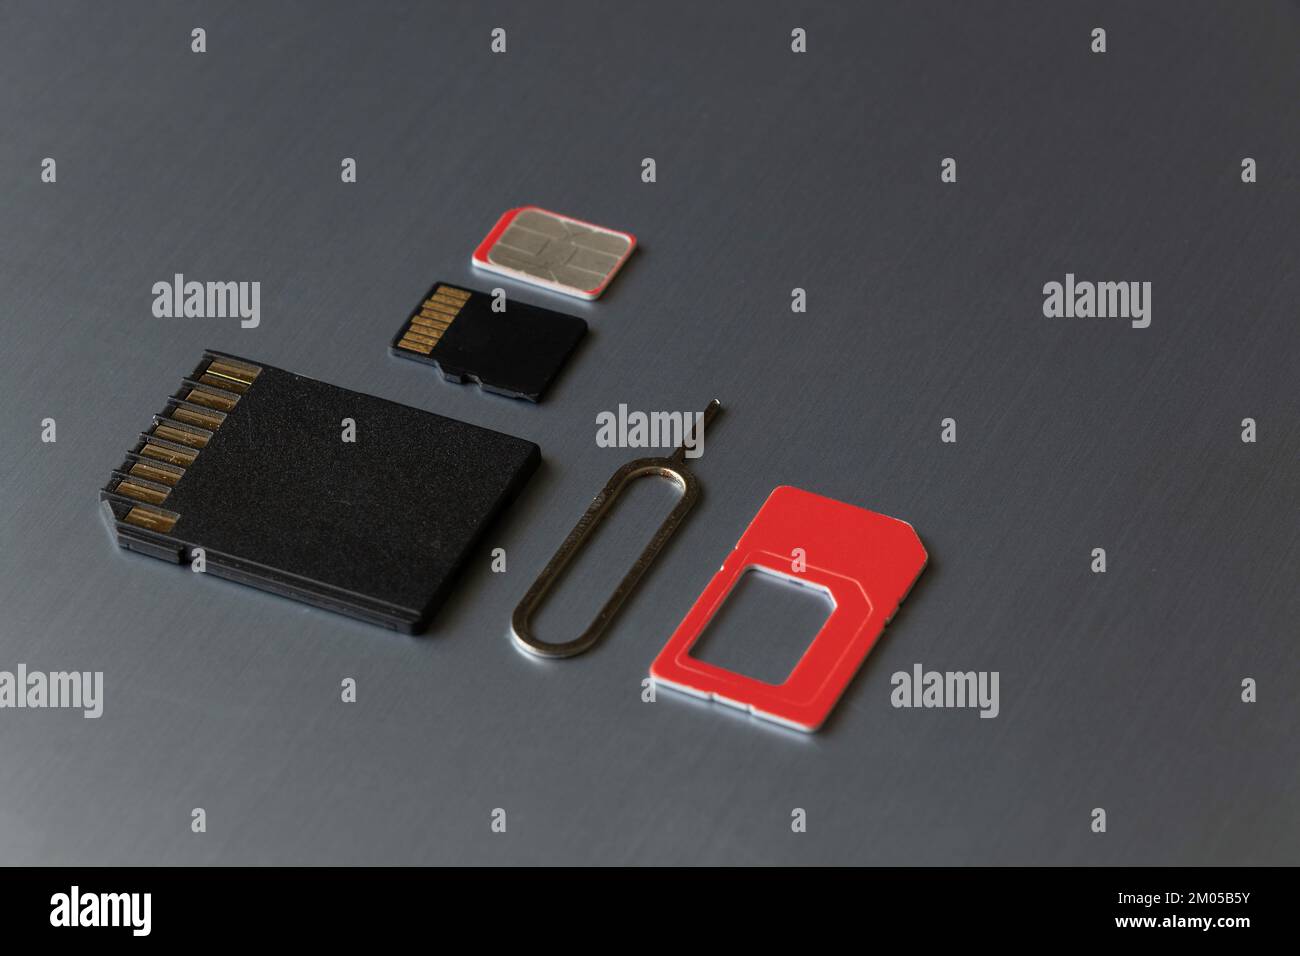 SIM card and paper clip to open the SIM card slot and the memory card are on a gray steel background Stock Photo